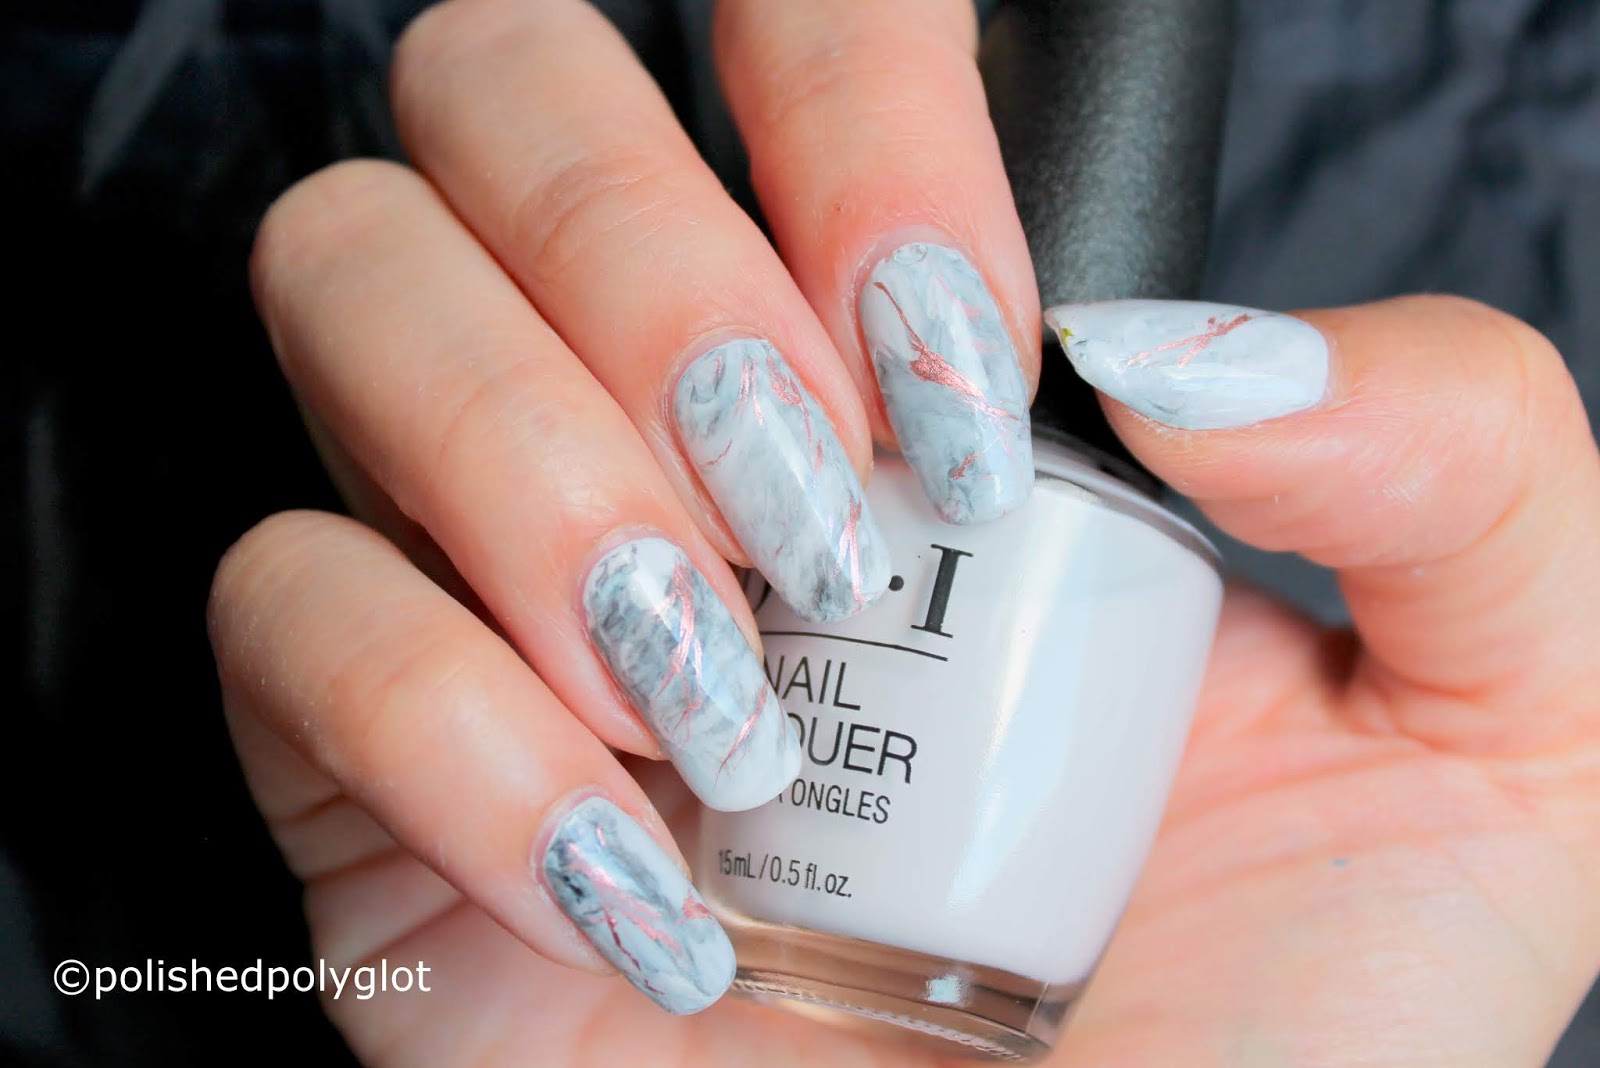 4. Black and White Marble Nails - wide 2